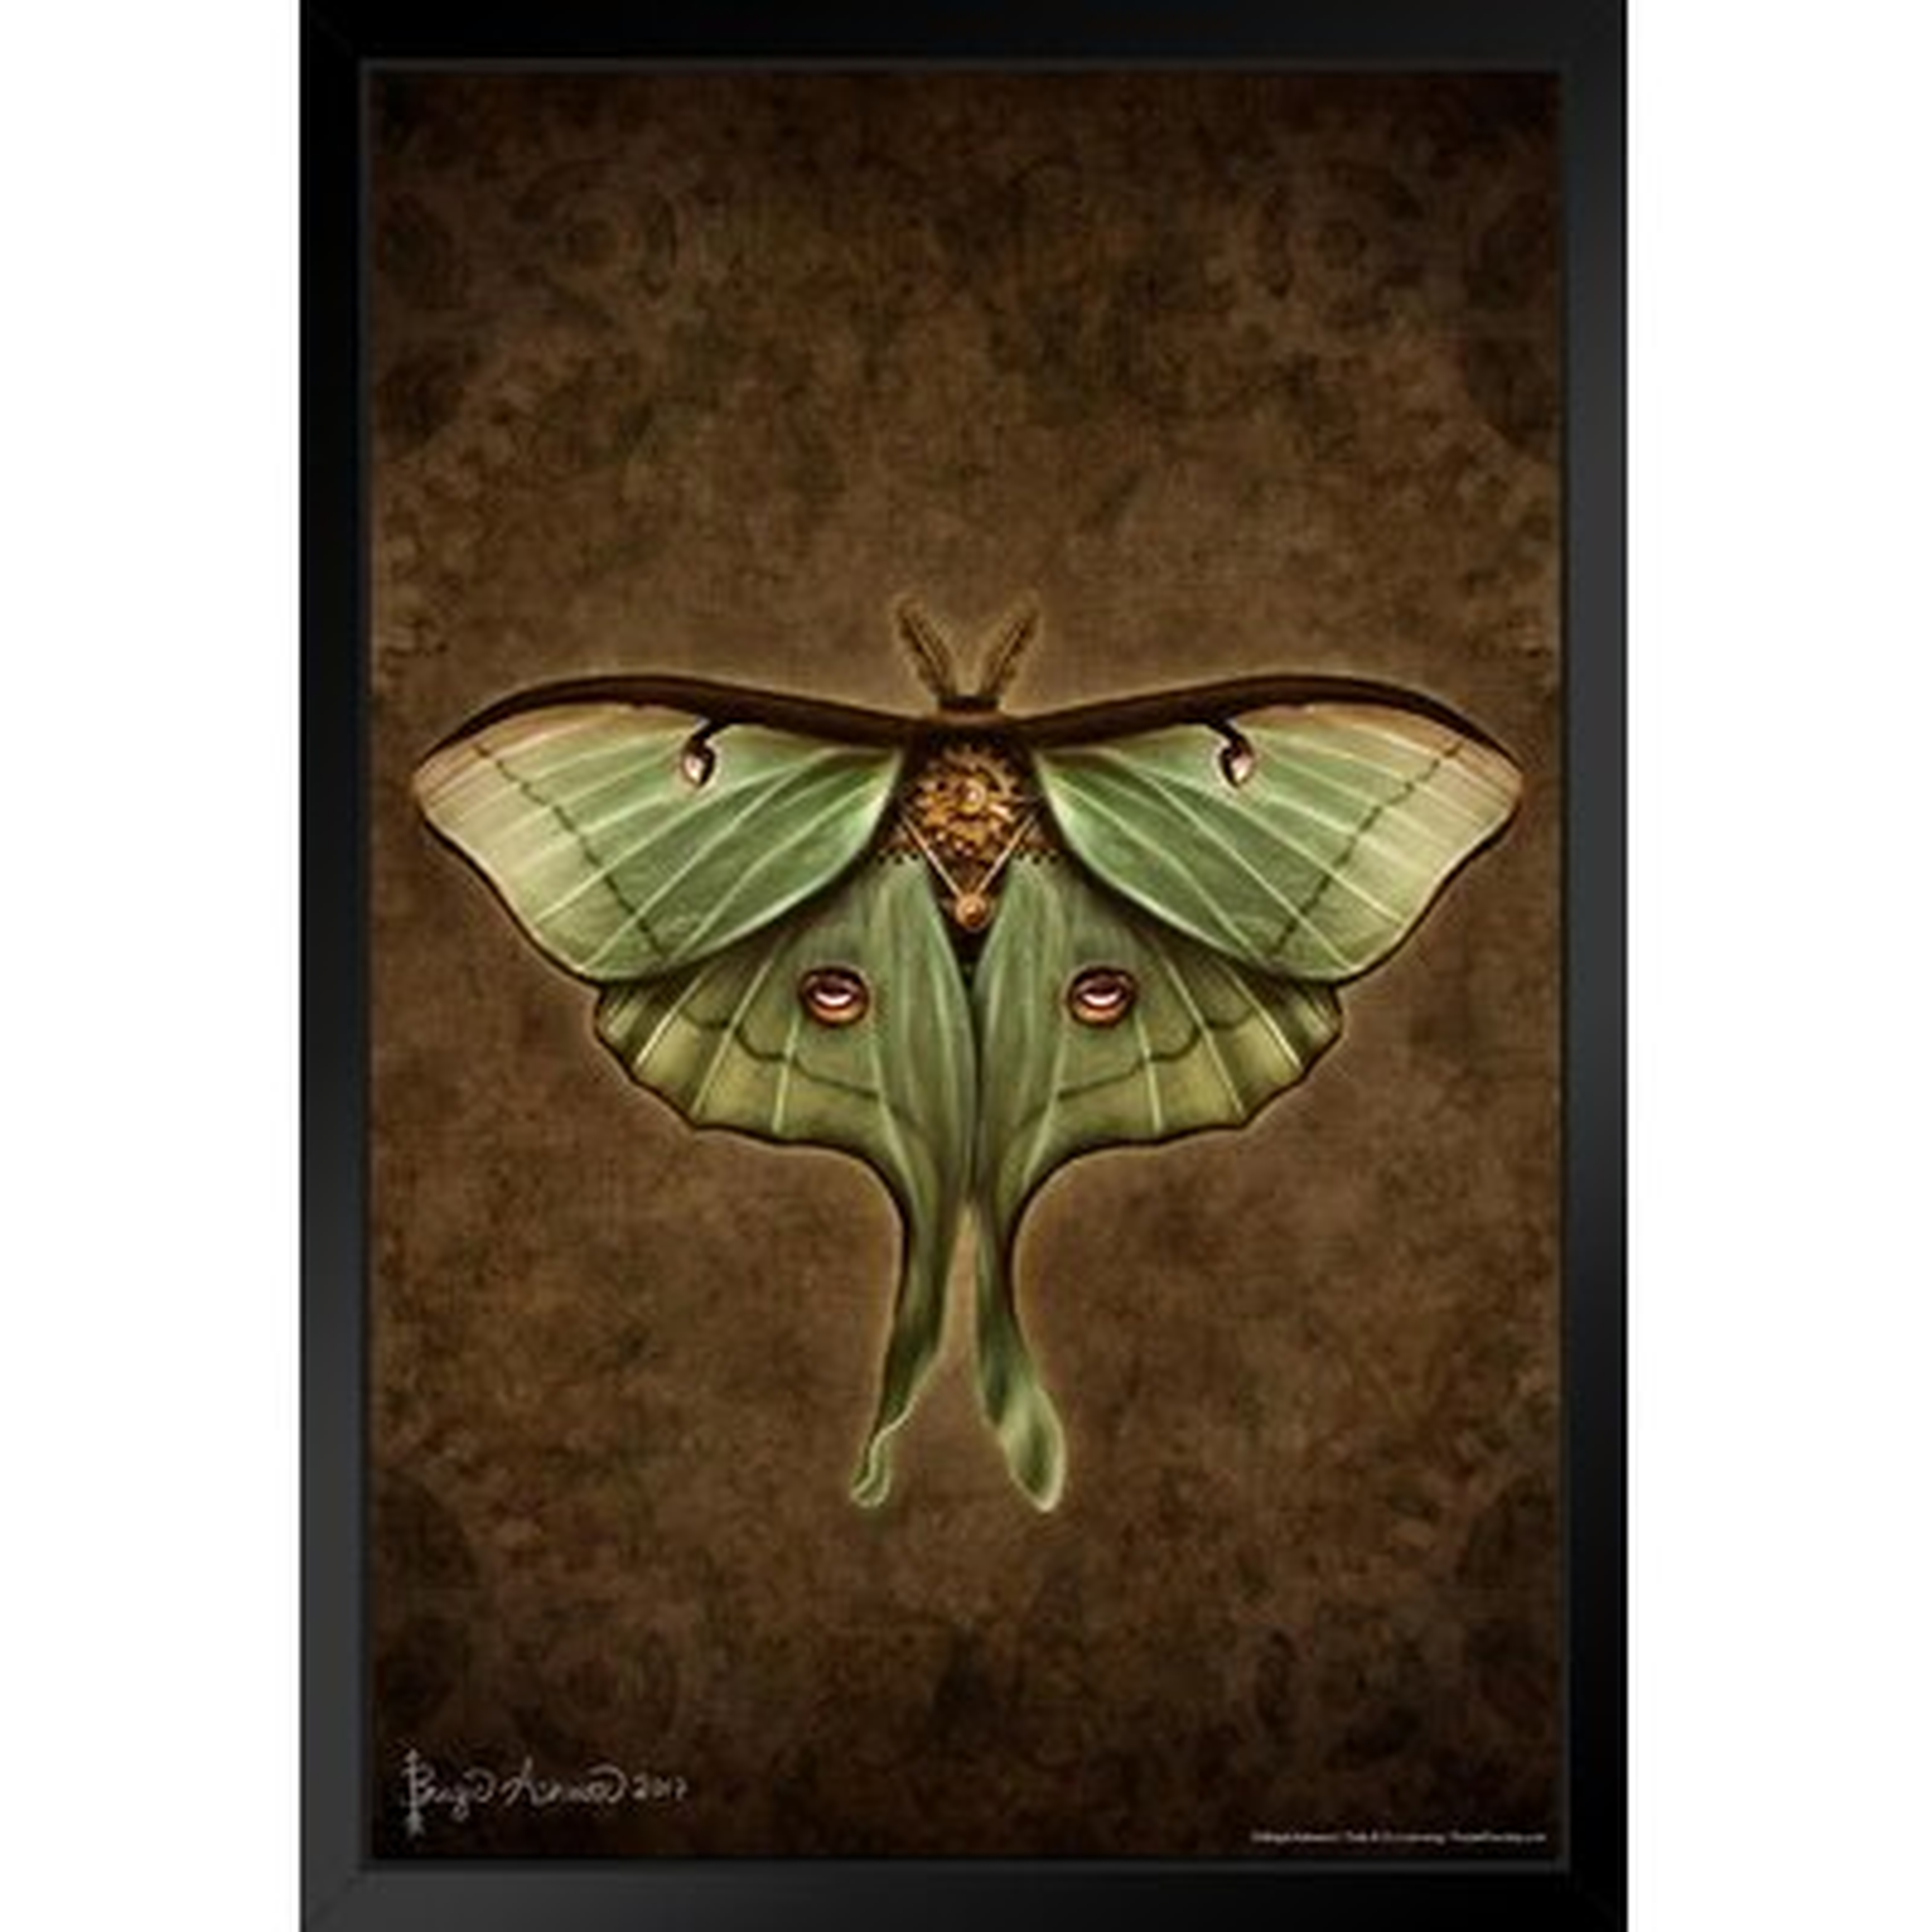 Steampunk Luna Moth By Brigid Ashwood Insect Wall Art Of Moths And Butterflies Butterfly Illustrations Insect Poster Moth Print Black Wood Framed Art Poster 14X20 - Wayfair